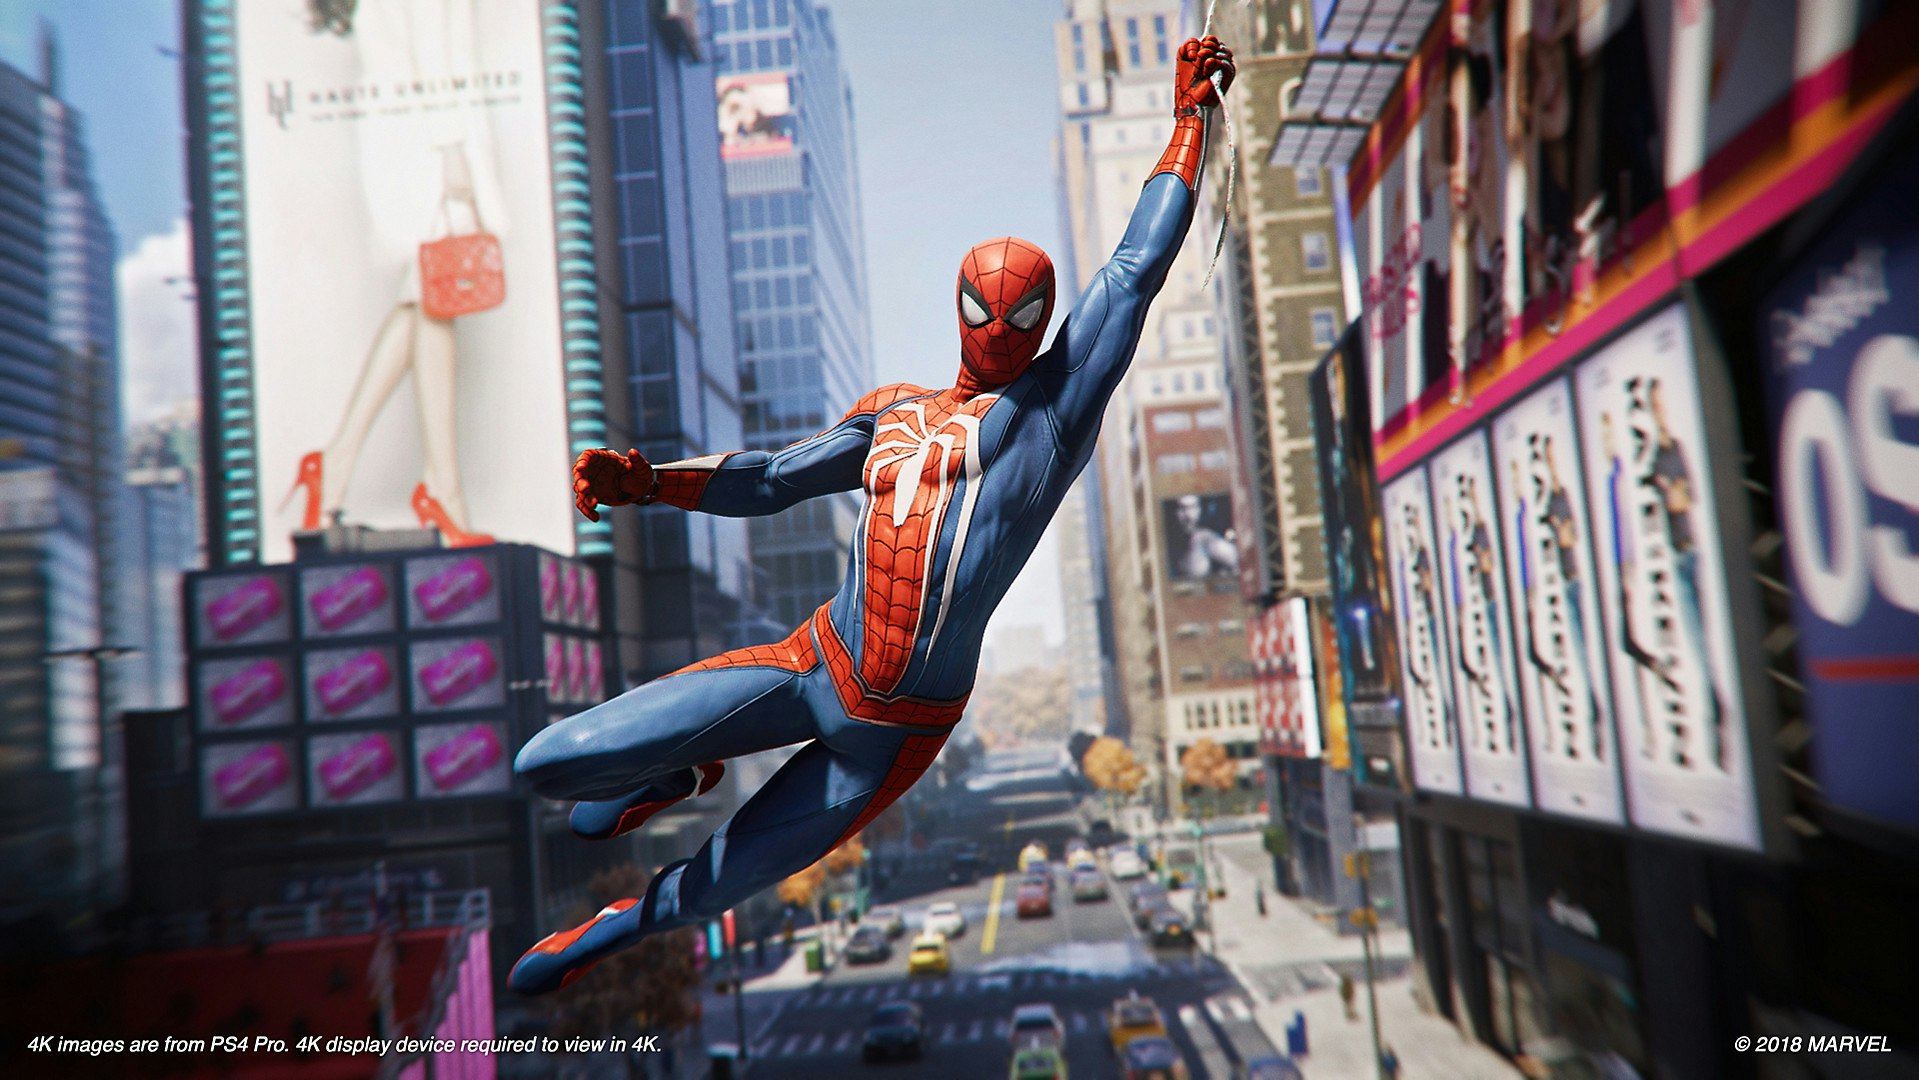 marvel spider man xbox one release date